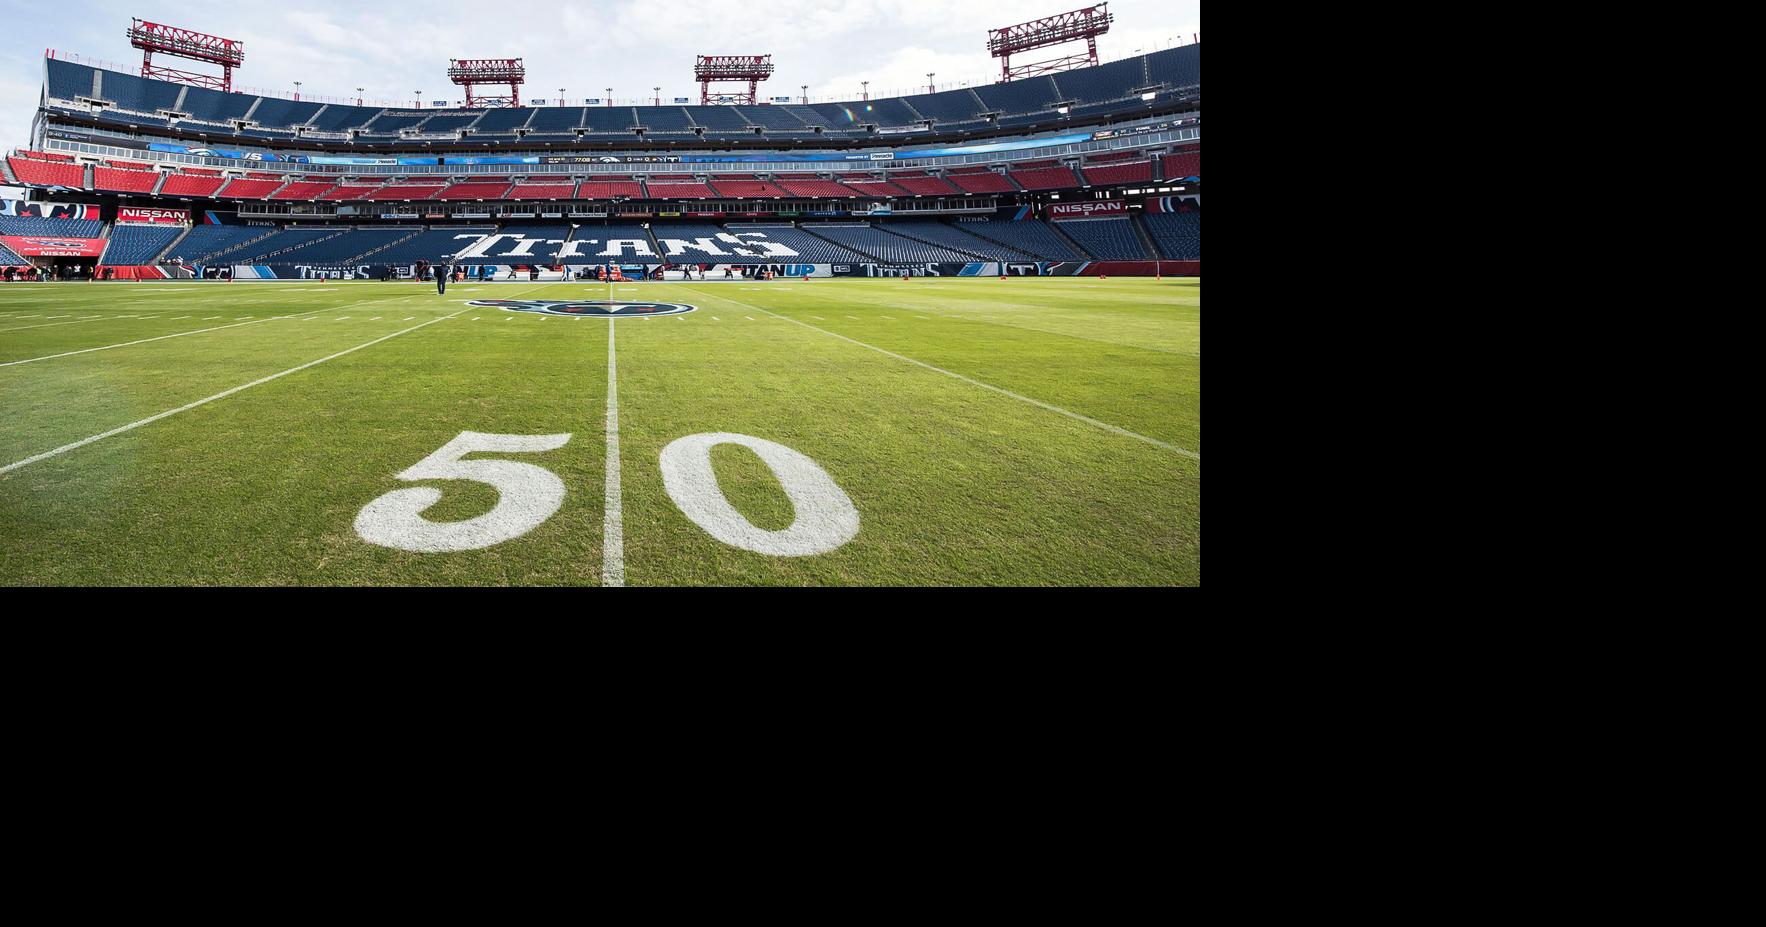 My buddy sent me a picture of the turf installed at Nissan Stadium